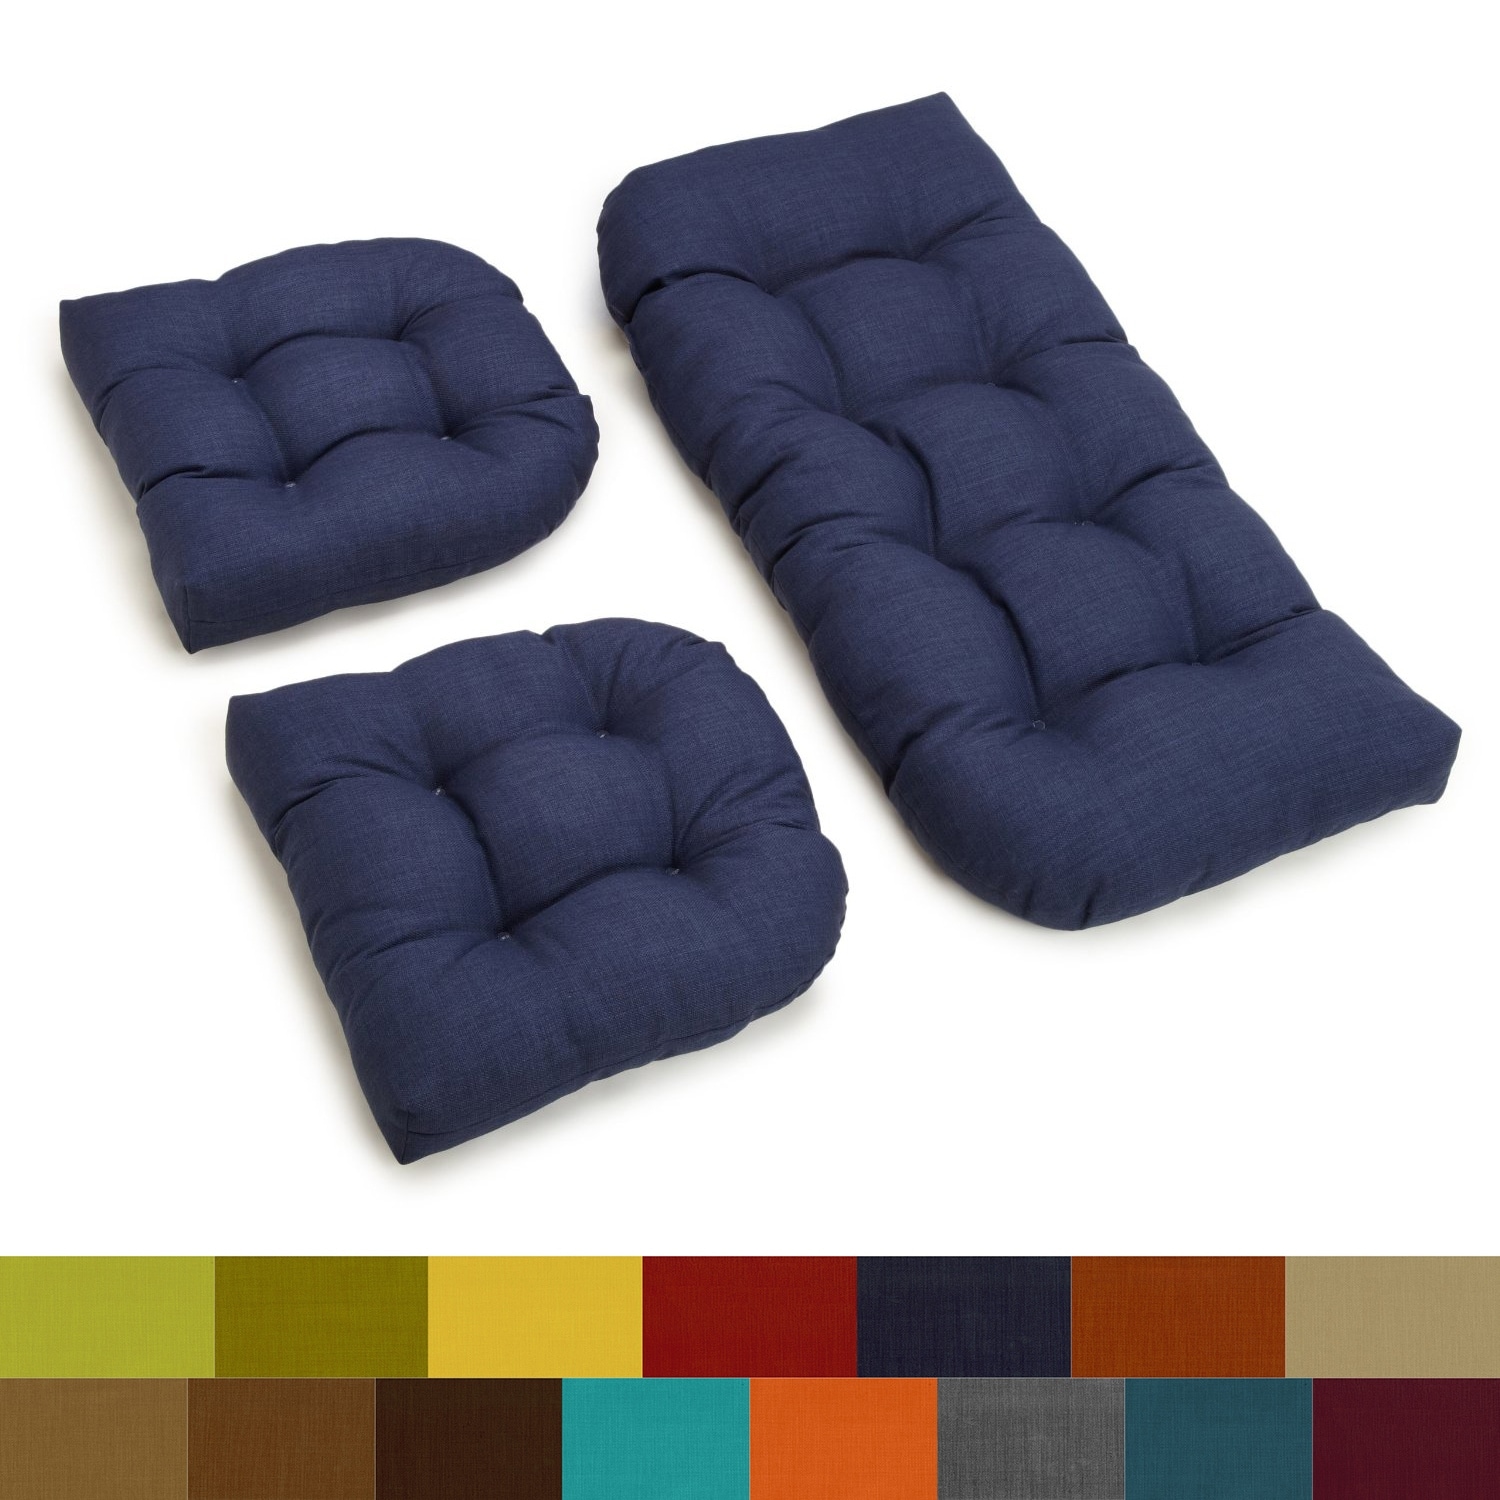 Water Resistant Outdoor Cushions and Throw Pillows - Bed Bath & Beyond